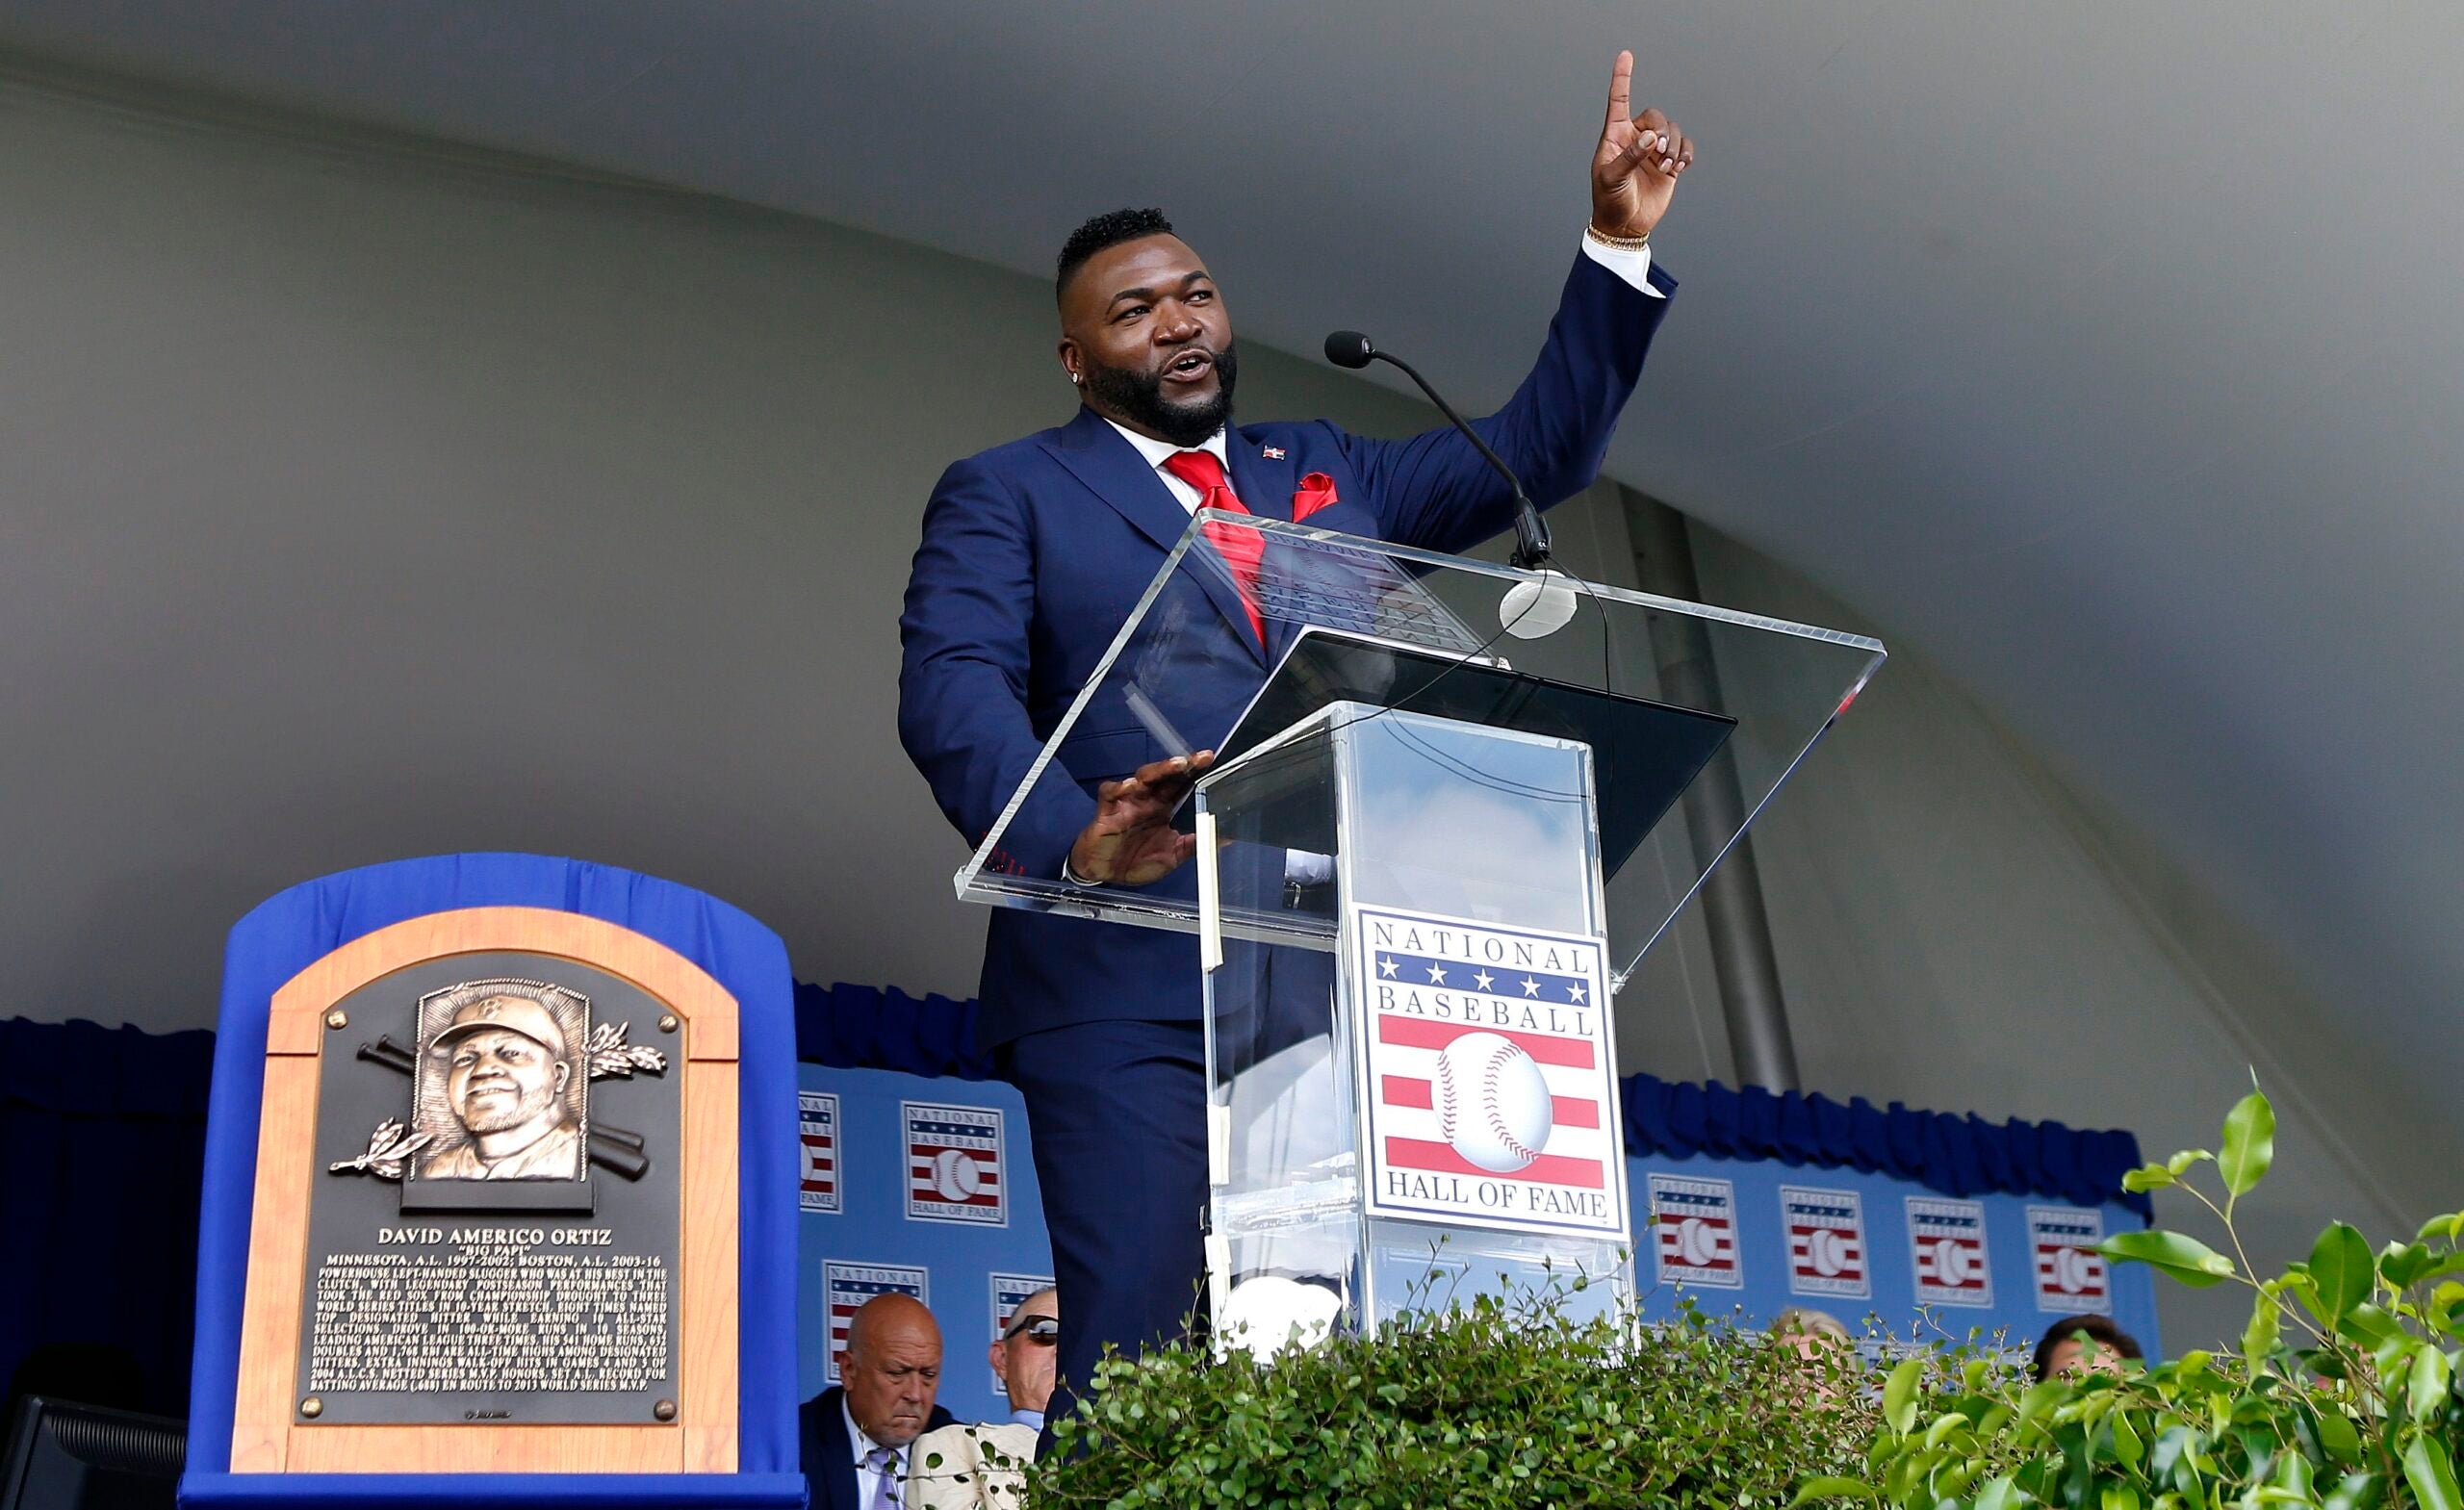 Nightengale: Without a doubt, David Ortiz is a Hall of Famer